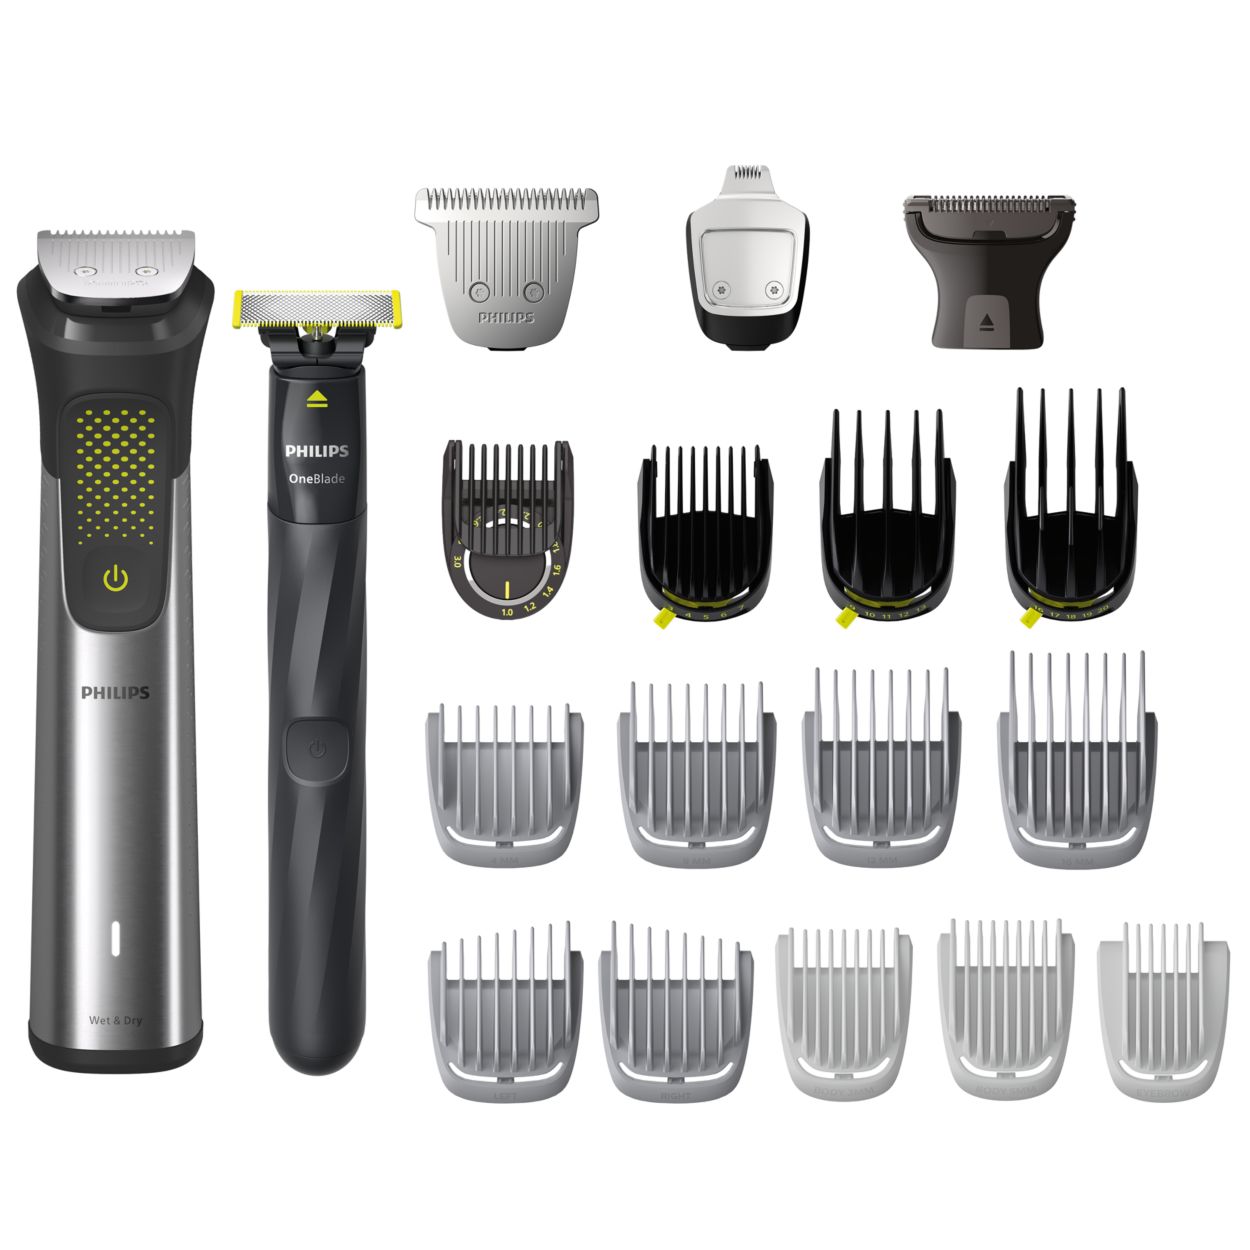 | All-in-One 9000 Trimmer MG9553/15 Series Philips